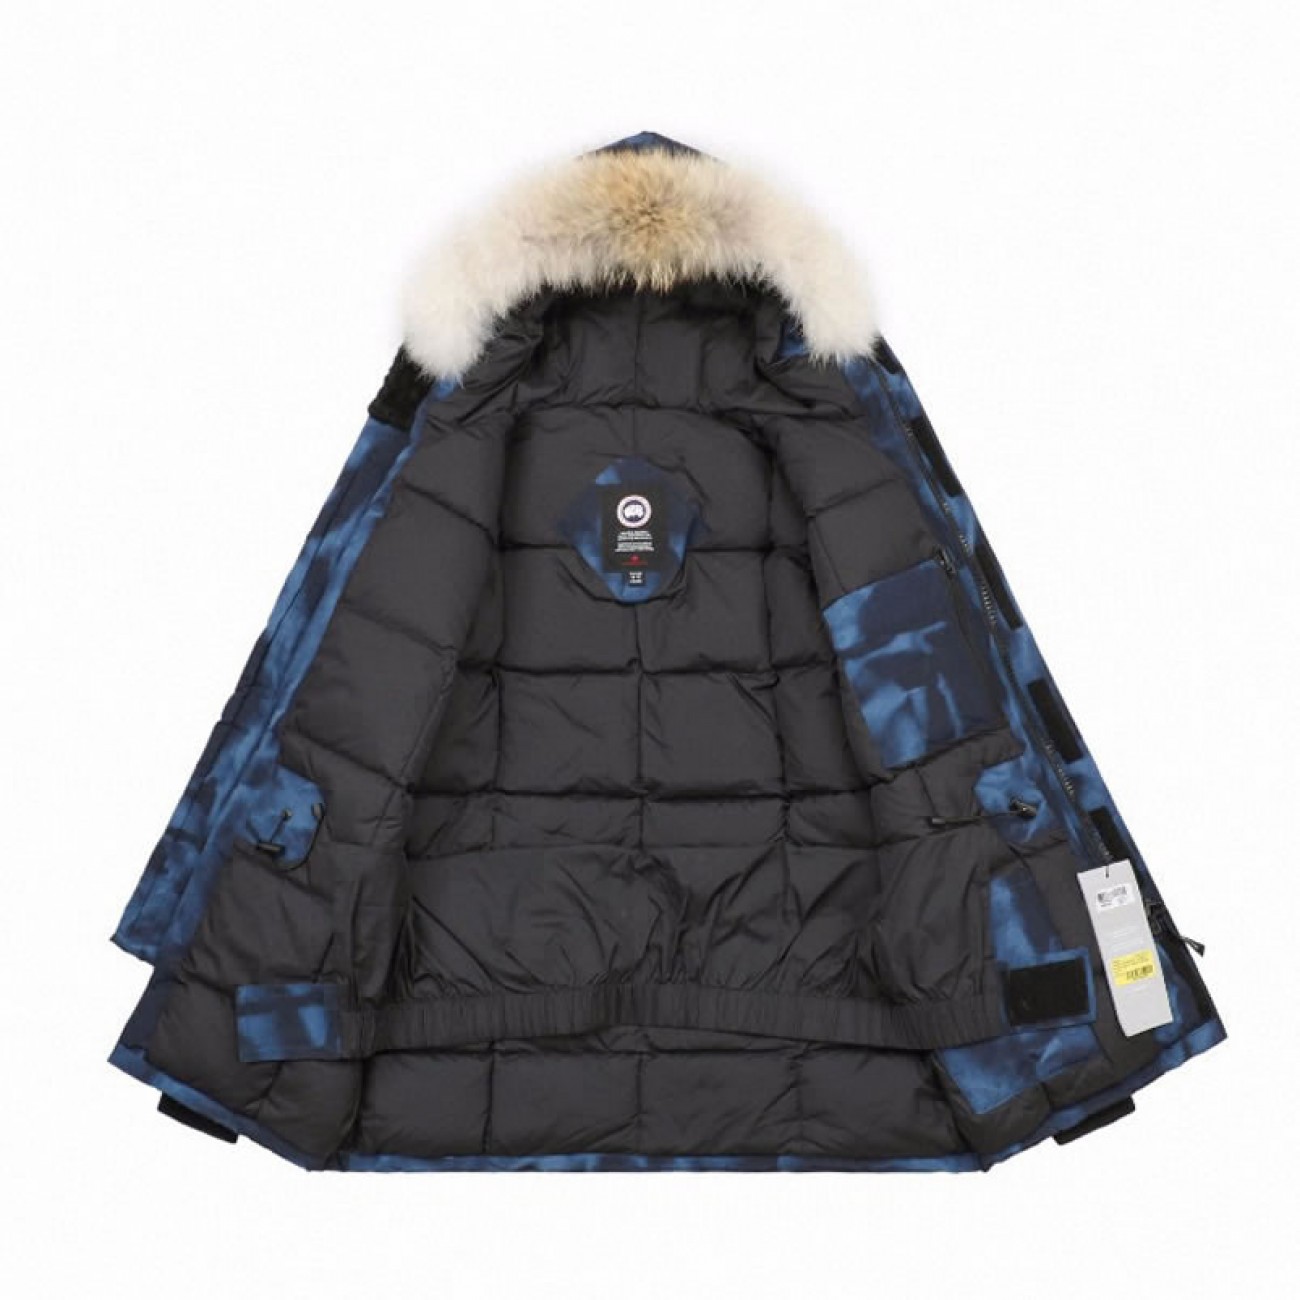 08 ' Canada Goose '19FW Expedition 4660MA Down Jacket Coat "Camouflage Blue"